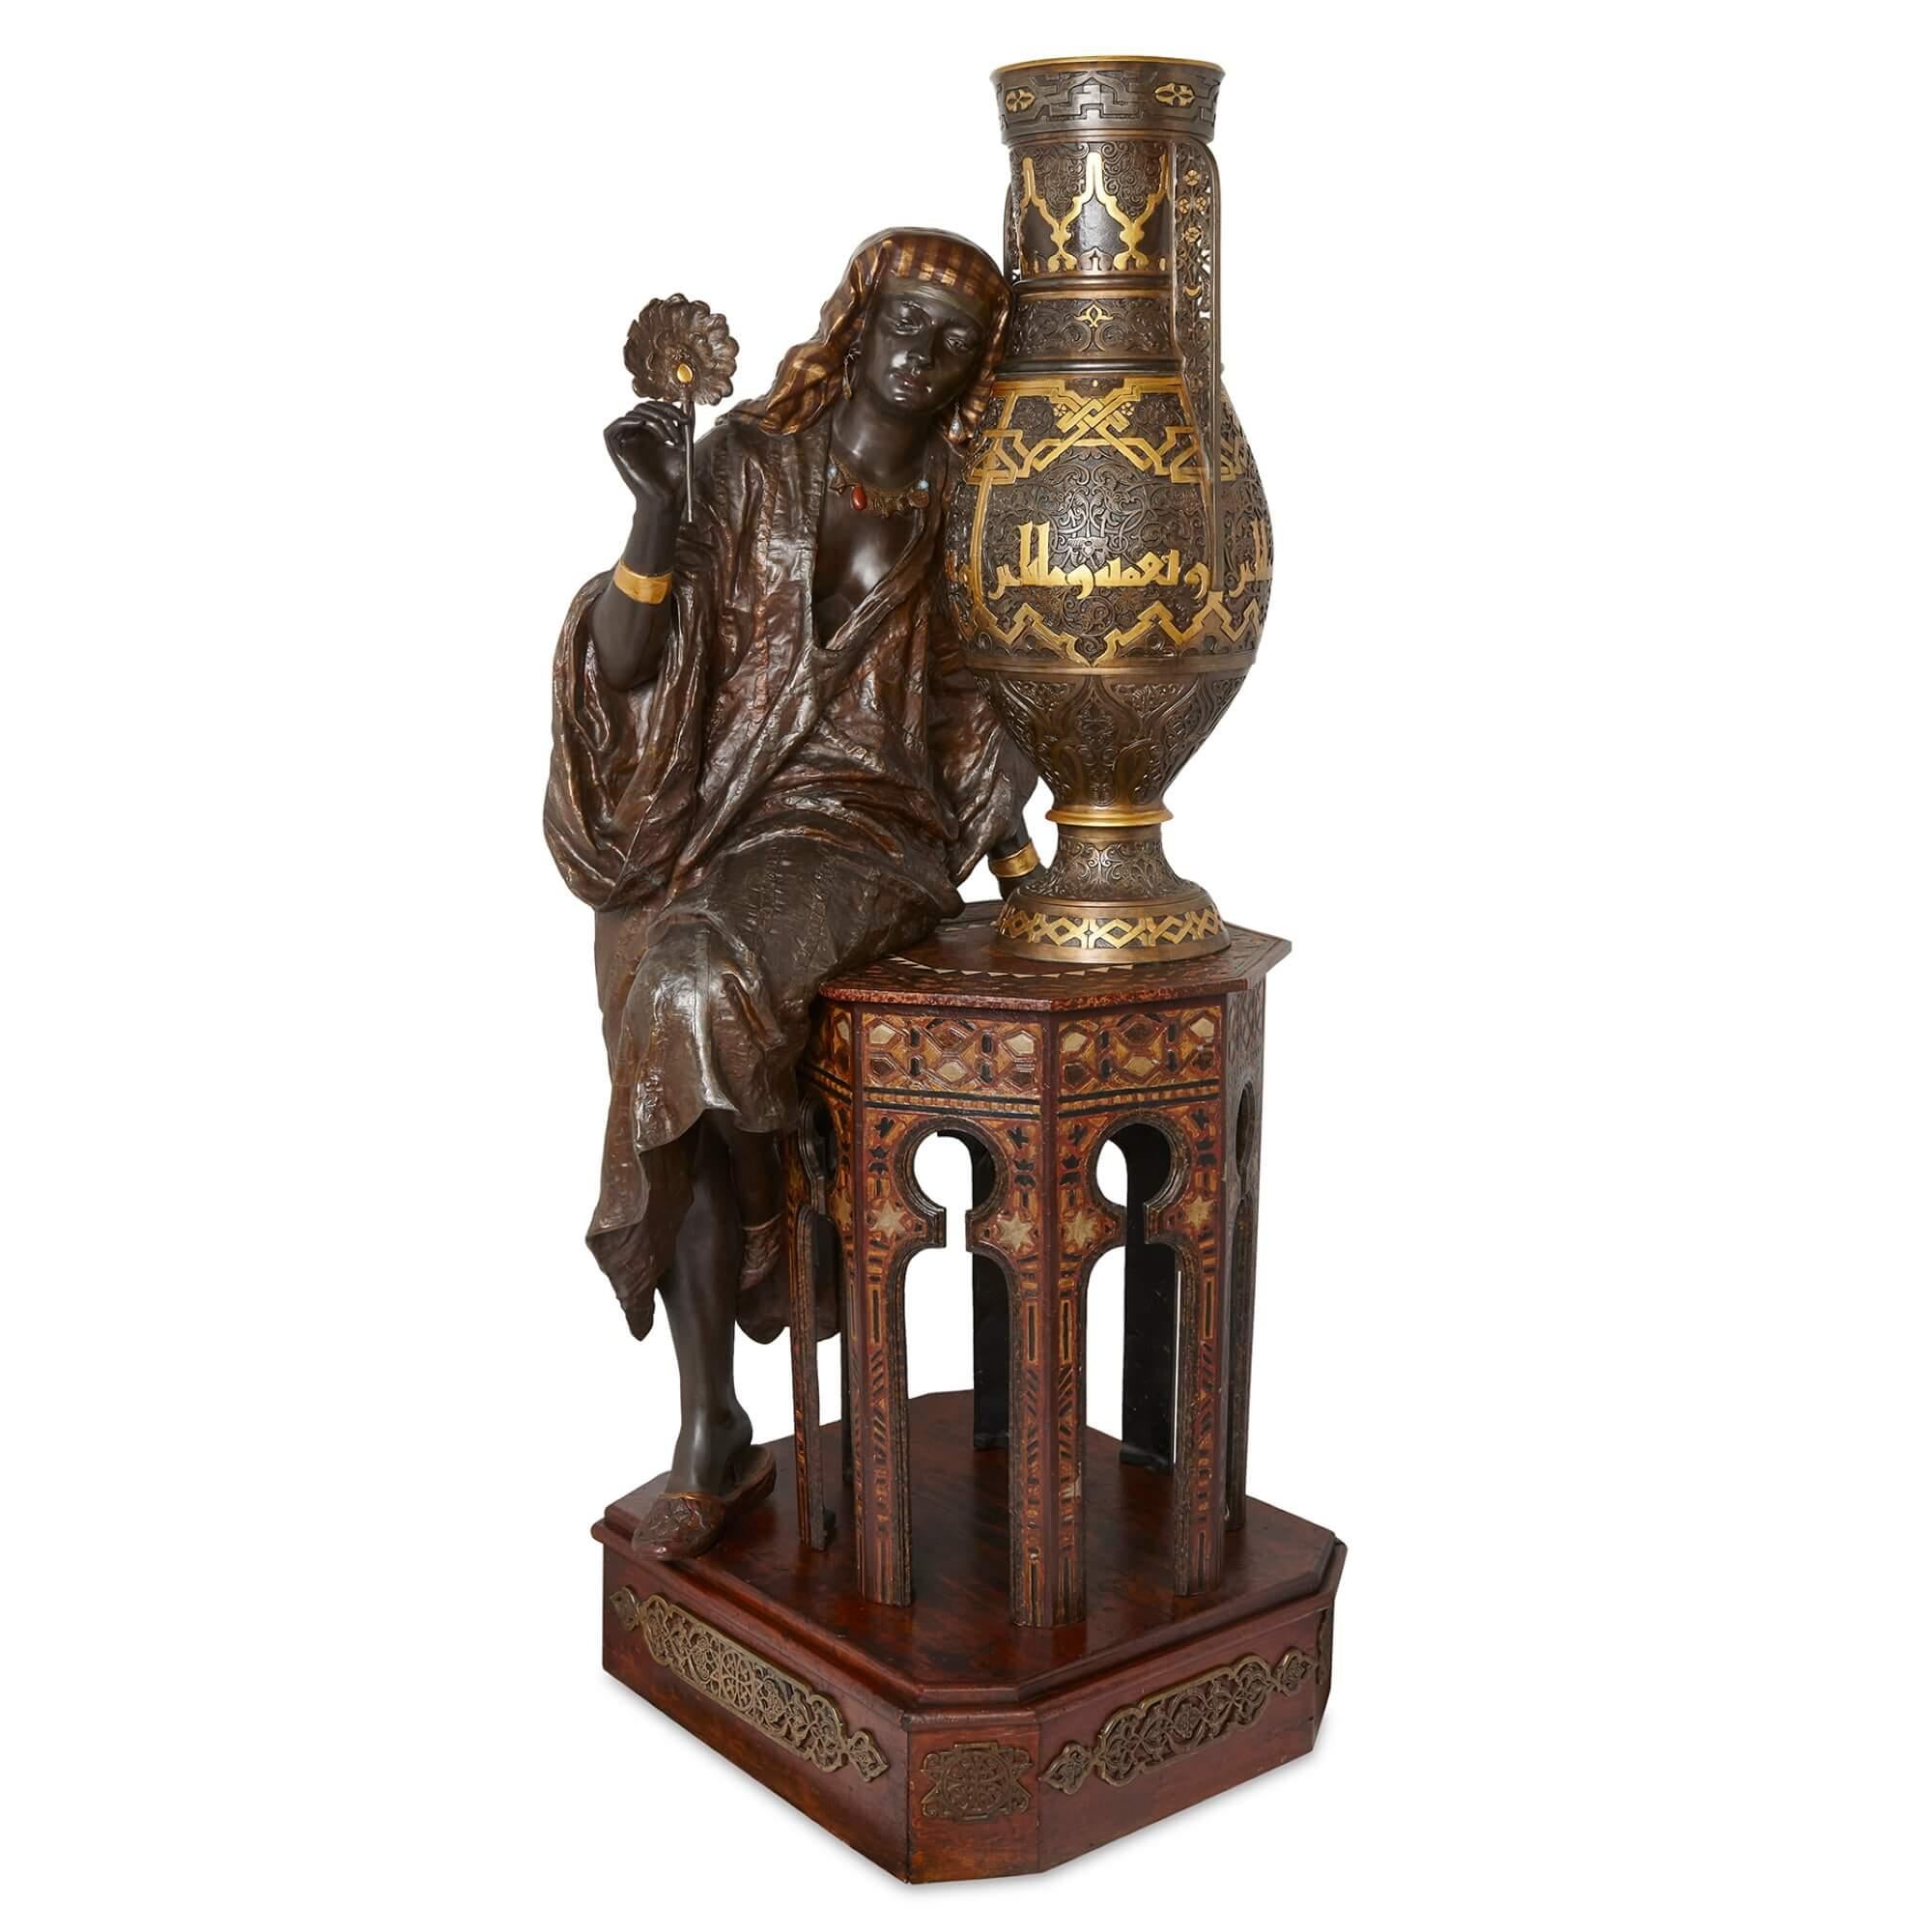 Very large spelter Orientalist sculpture attributed to Hottot
French, Late 19th Century
Height 194cm, width 84cm, depth 75cm

This sensational life-size figural group depicts a female figure leaning against a table. The woman wears a typical